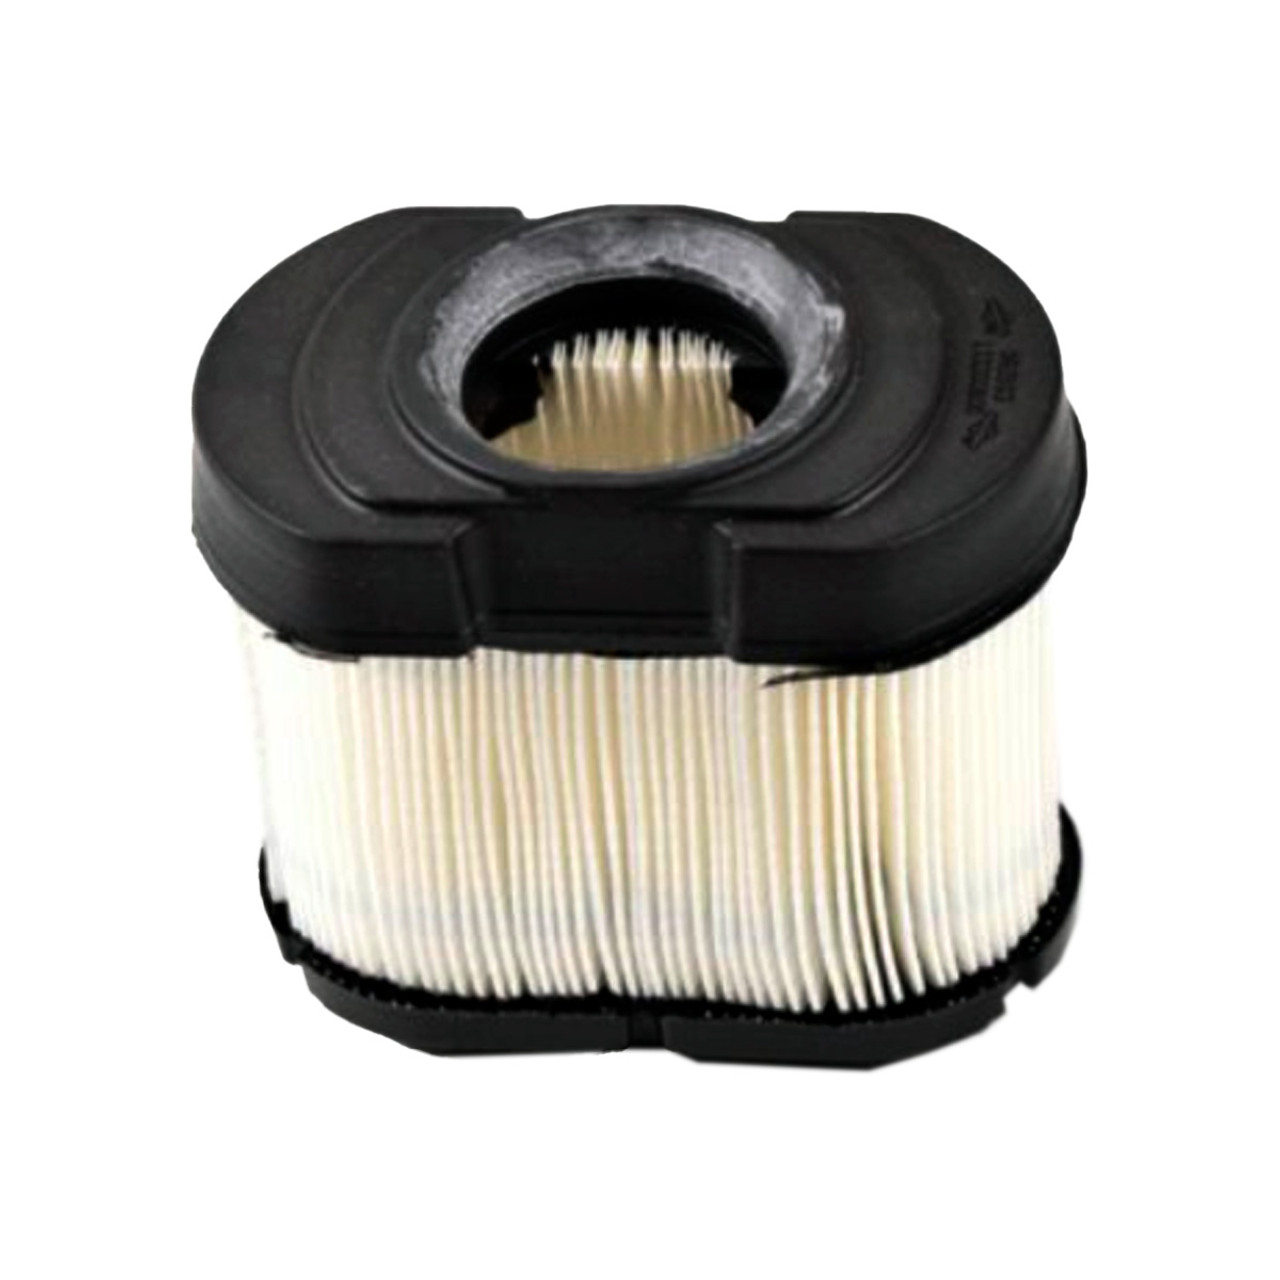 Scag Freedom Z Air Filter BS 593240 - Scag Parts Online